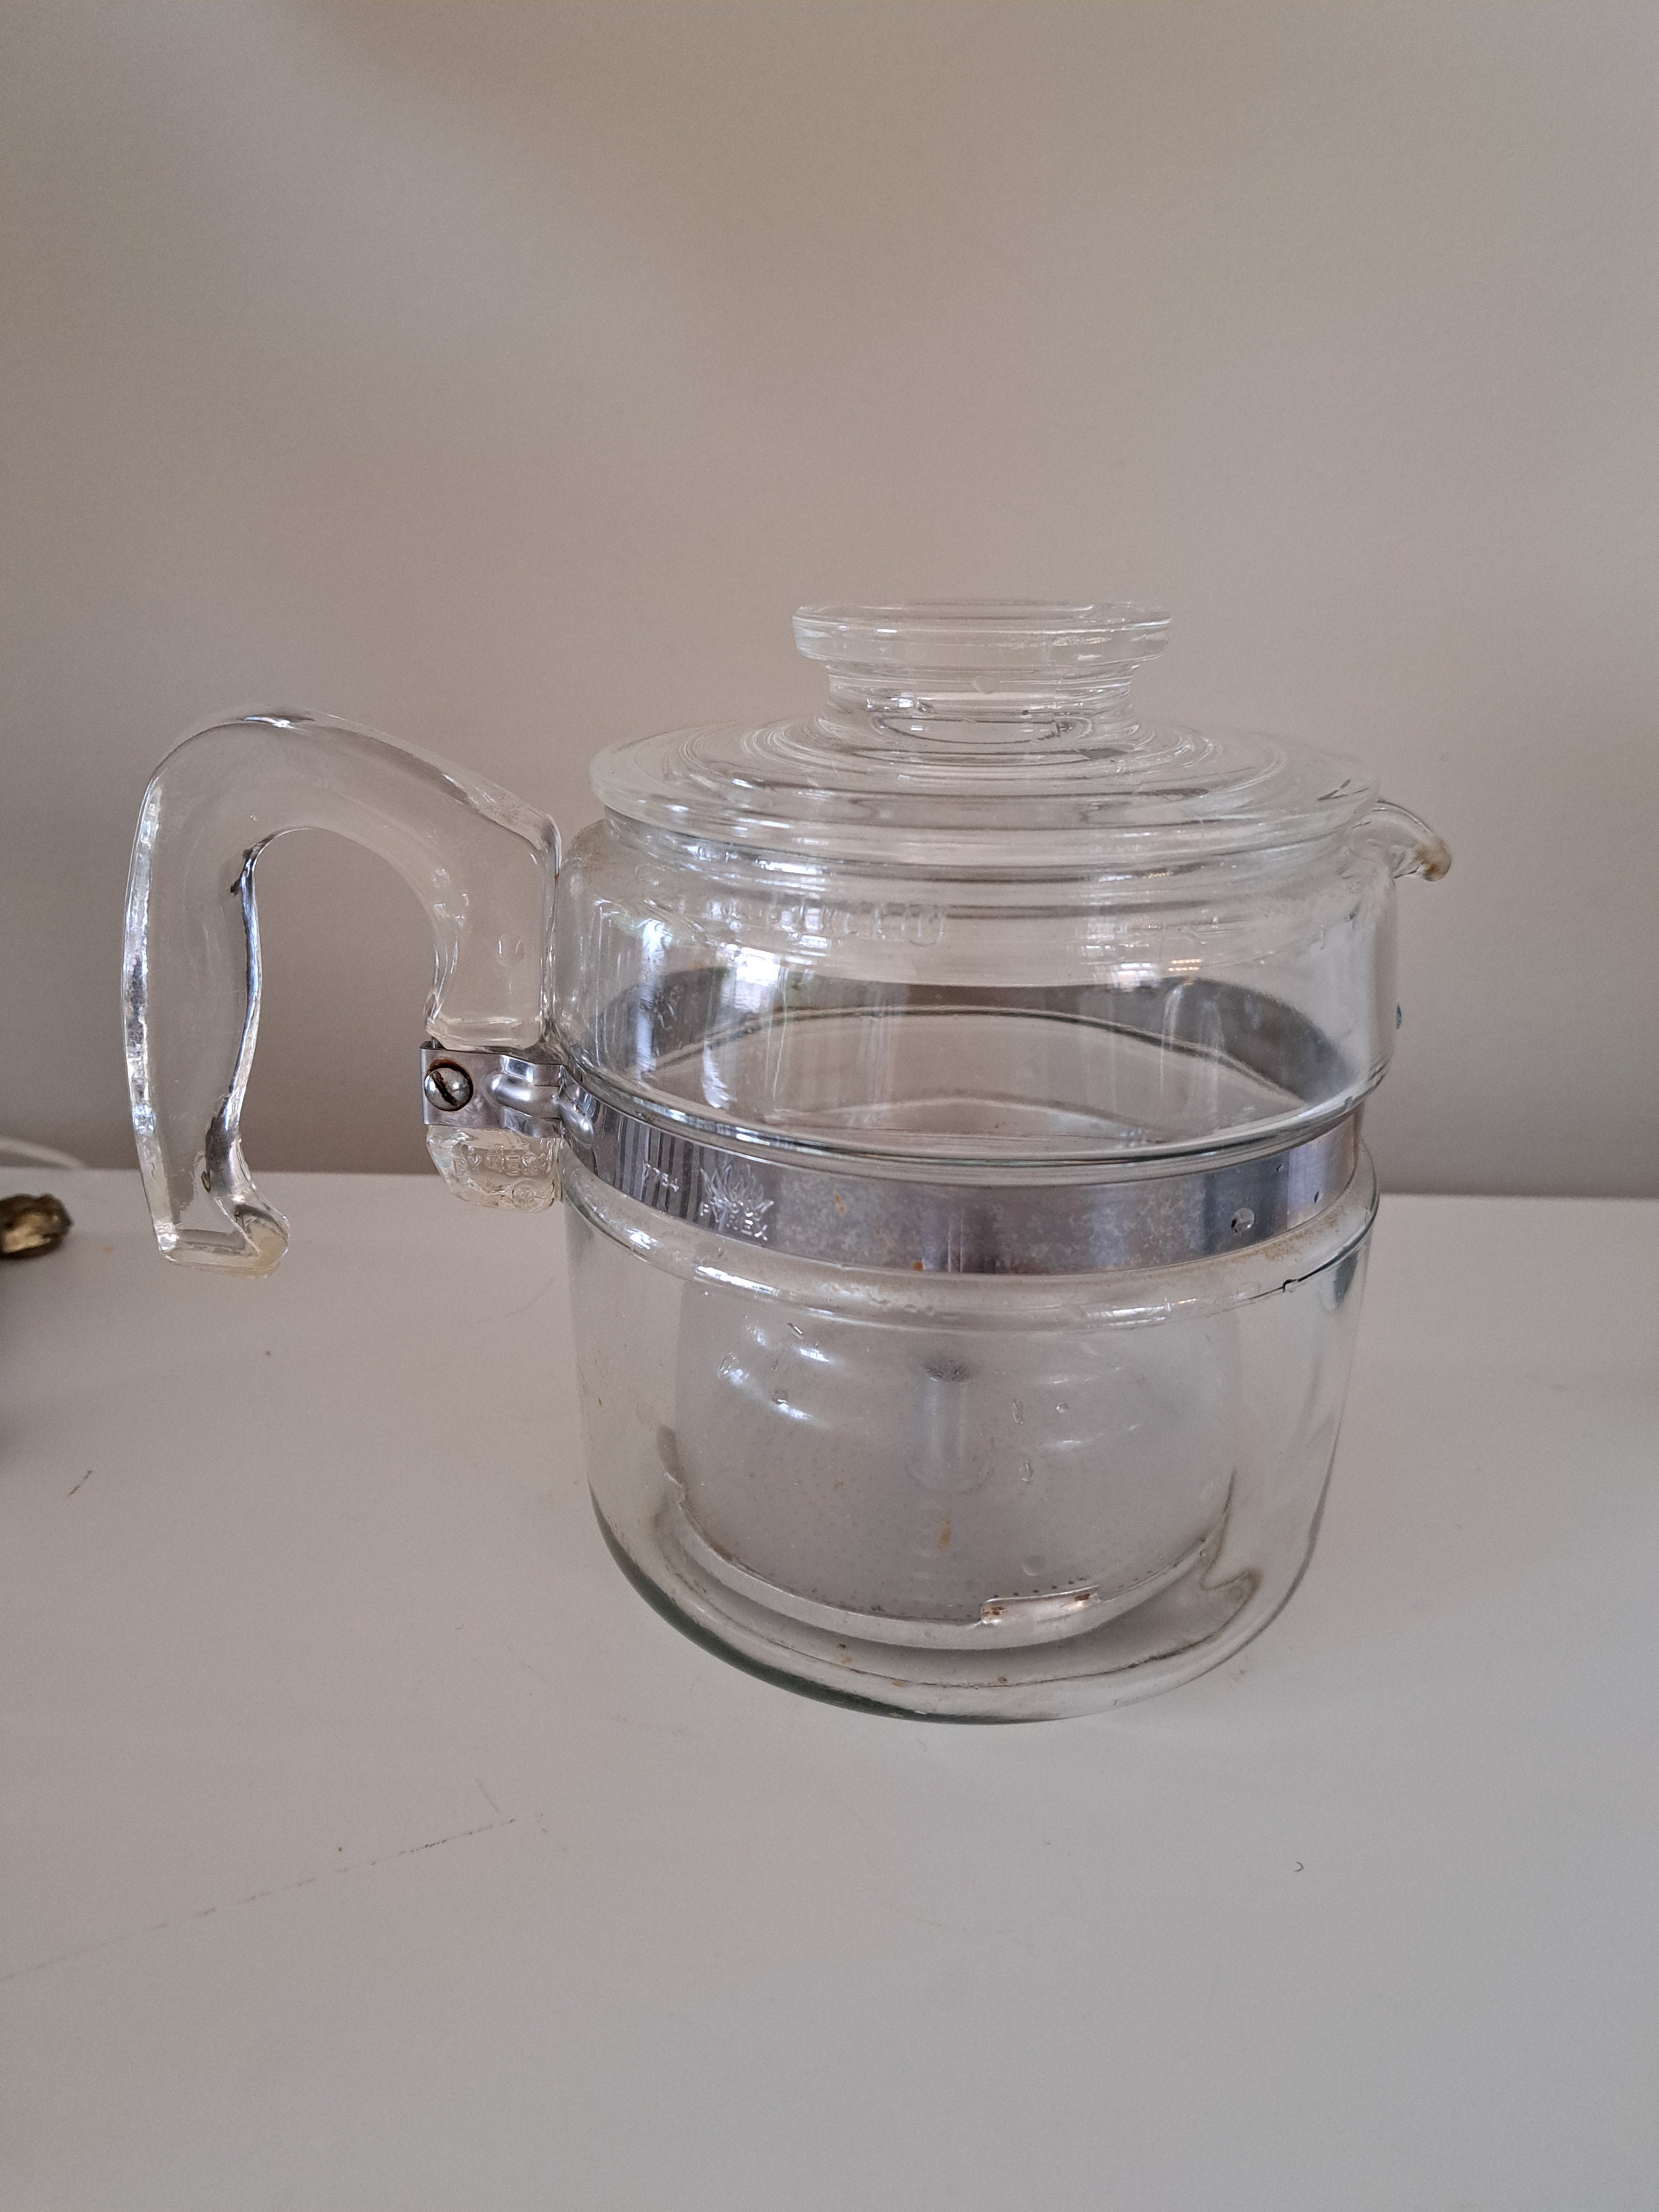  VINTAGE Corning Pyrex Flameware 4 cup Percolator Coffee Pot:  Other Products: Home & Kitchen